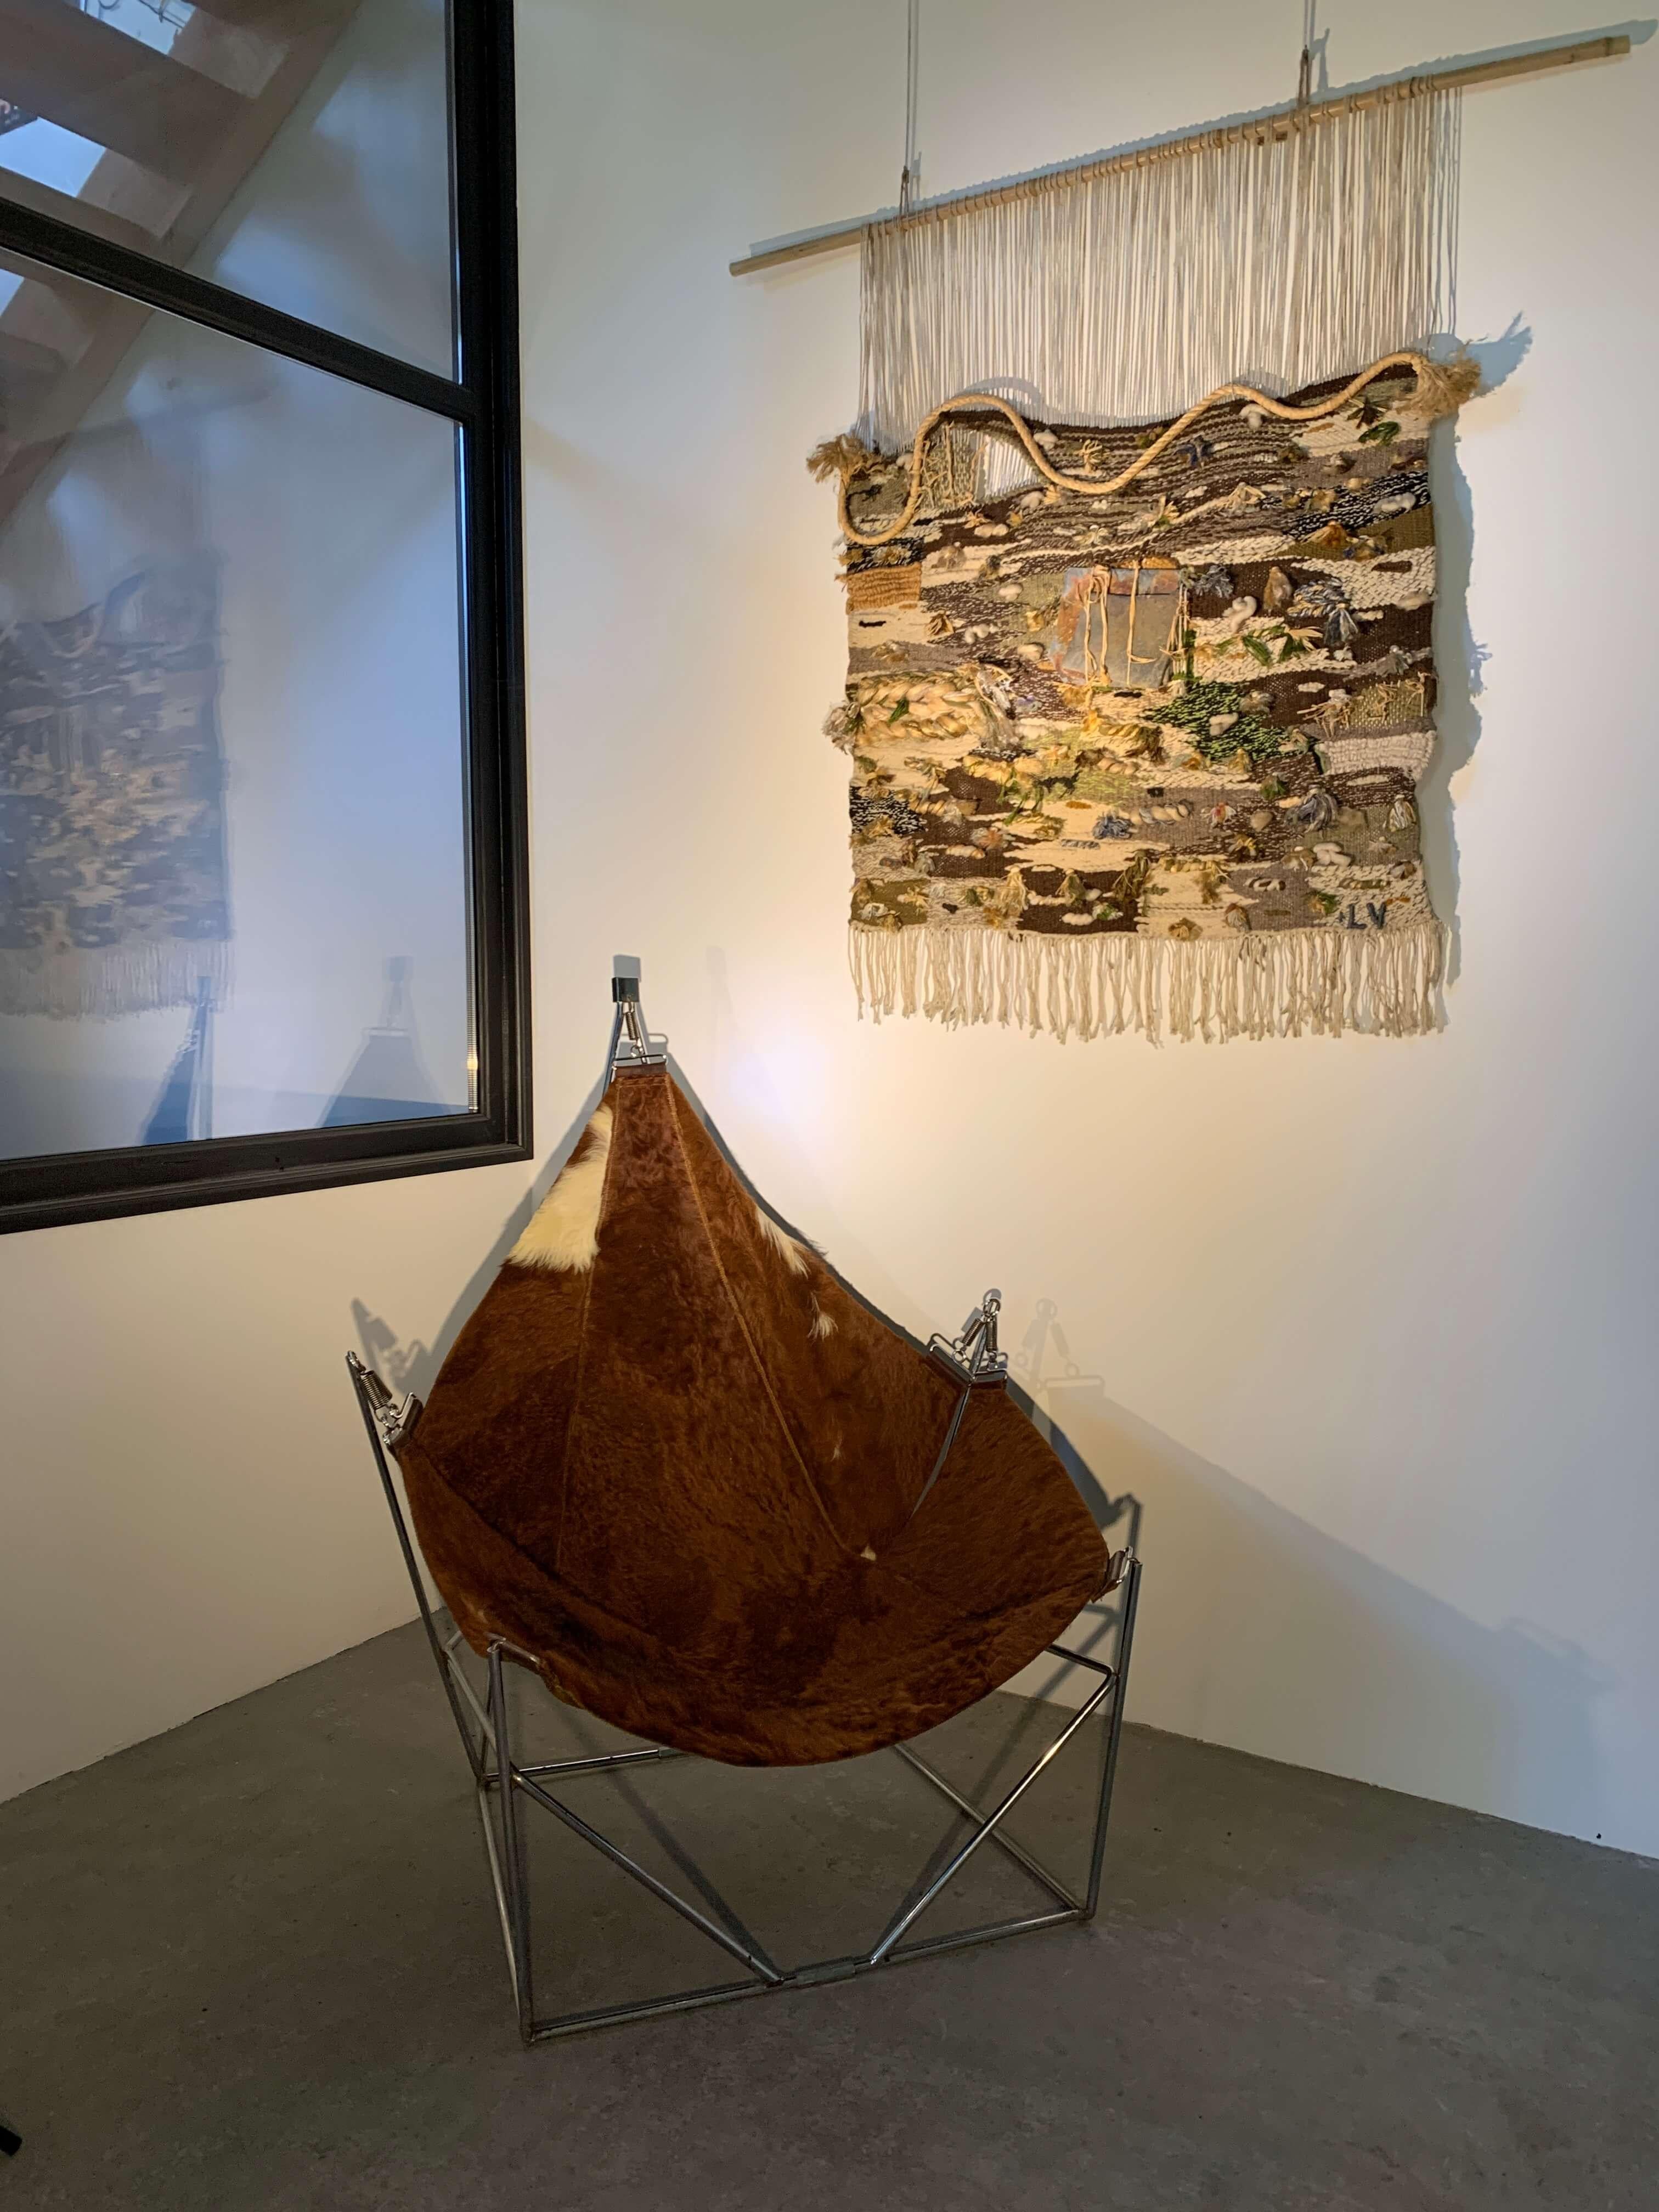 The tapestry evokes a striking brutalism. 
The artist has meticulously woven with a variety of materials : jute, ropes, cotton, wool, intertwining them, twisting them, binding them in a symphony of tangled textures. In the center, two stones mark a